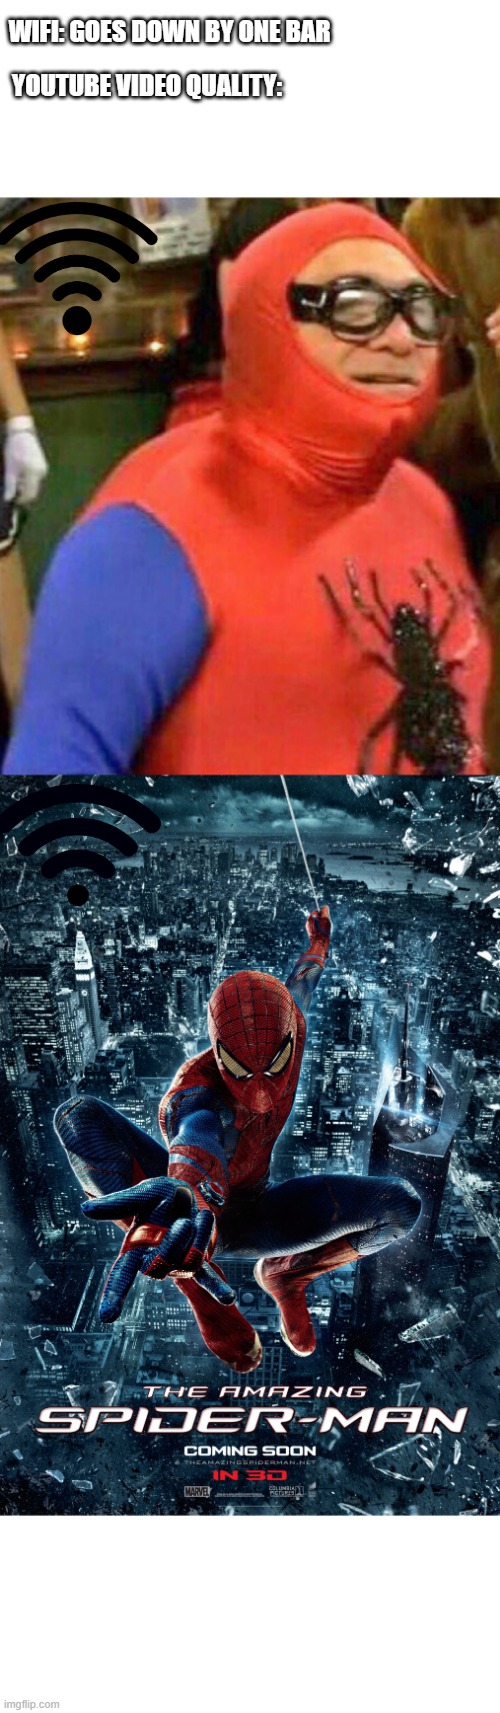 WIFI: GOES DOWN BY ONE BAR; YOUTUBE VIDEO QUALITY: | image tagged in danny devito dressed as spider-man | made w/ Imgflip meme maker